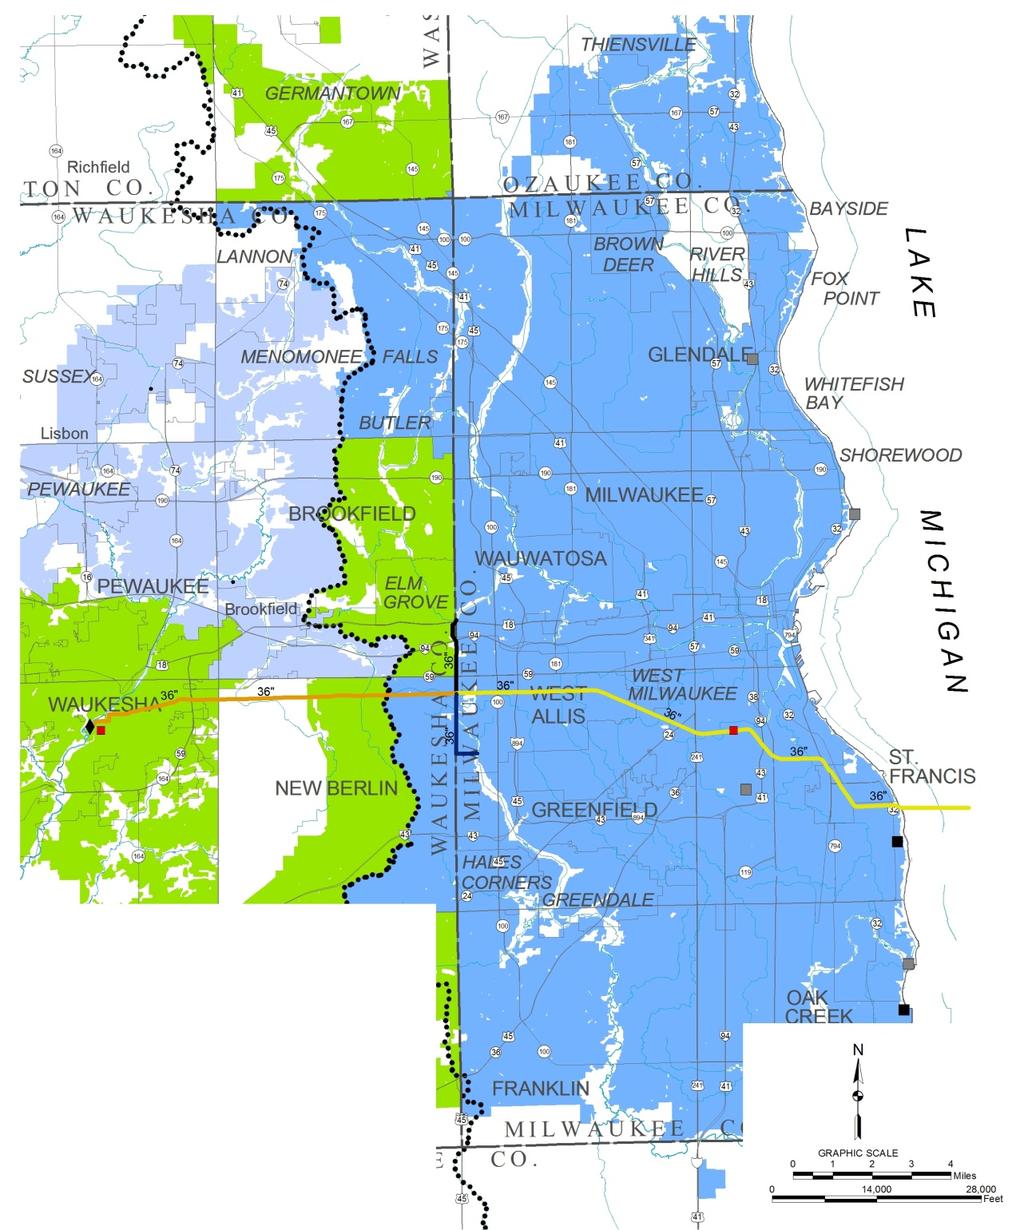 Options 1 4 for Return Flow for Subalternative 2 to the Composite Plan: Return Flow Pipelines to Lake Michigan, Underwood Creek, and Root River Return Flow